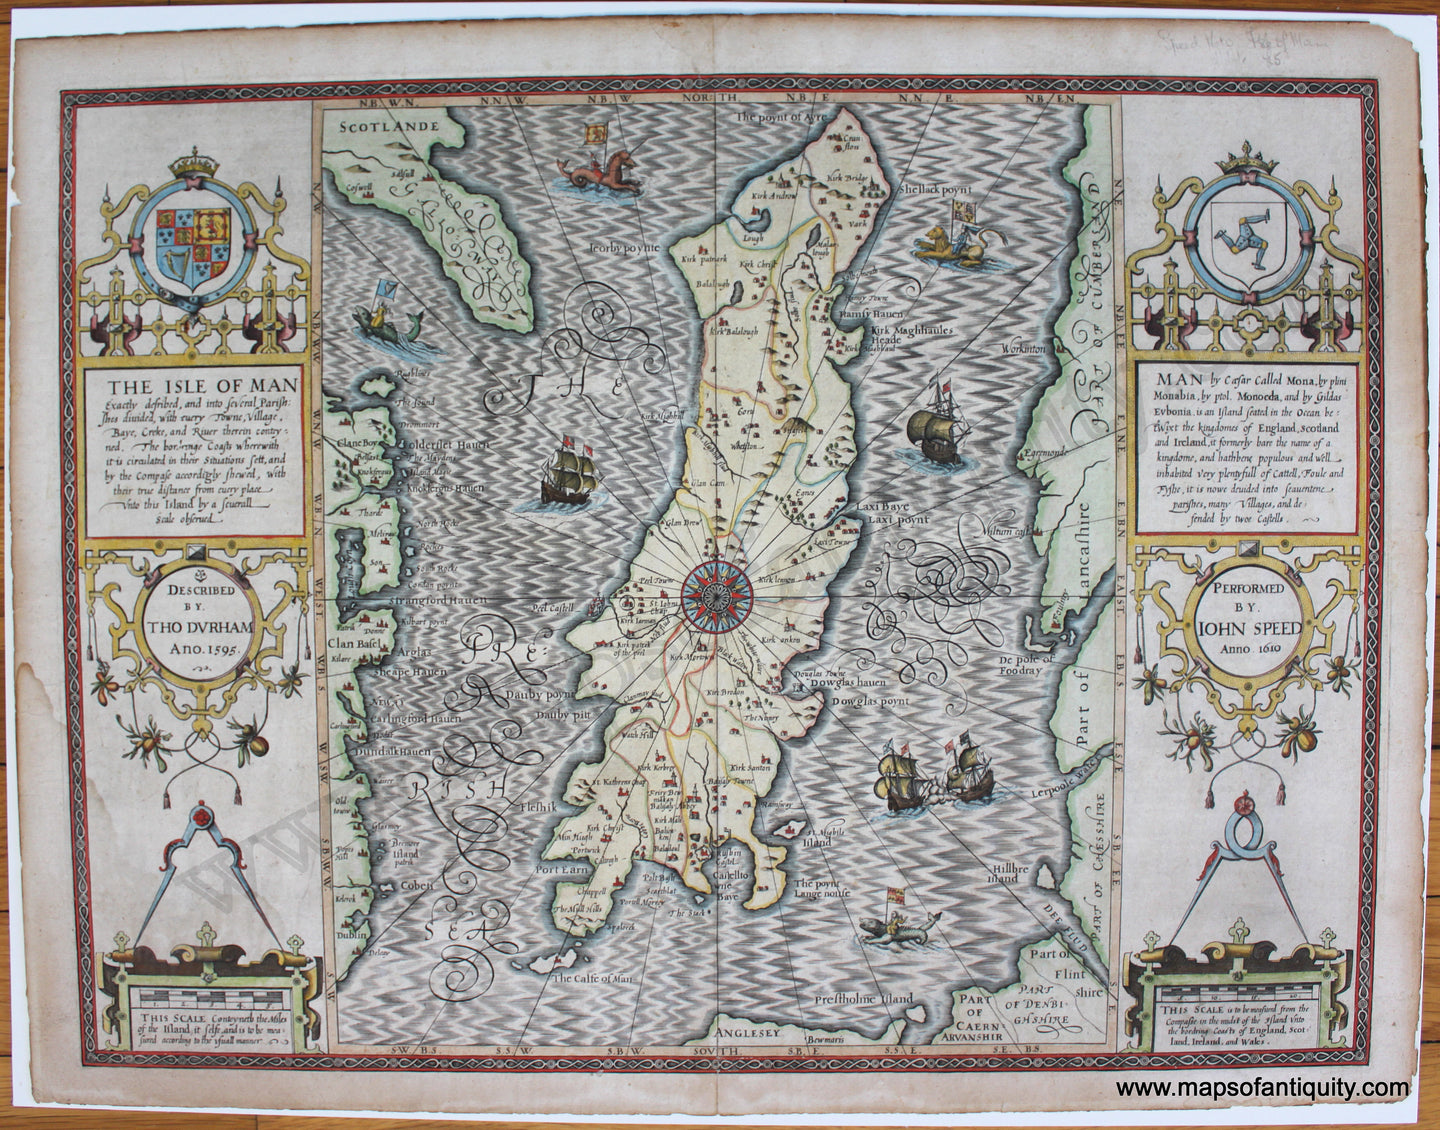 Antique-Hand-Colored-Map-Isle-of-Man-Exactly-described-and-the-several-Parish:shes-divided-with-every-Towne-Village-Baye-Creke-and-River-therein-conteyned-.-.-.-C.-1612-1616-Speed-England-1600s-17th-century-Maps-of-Antiquity